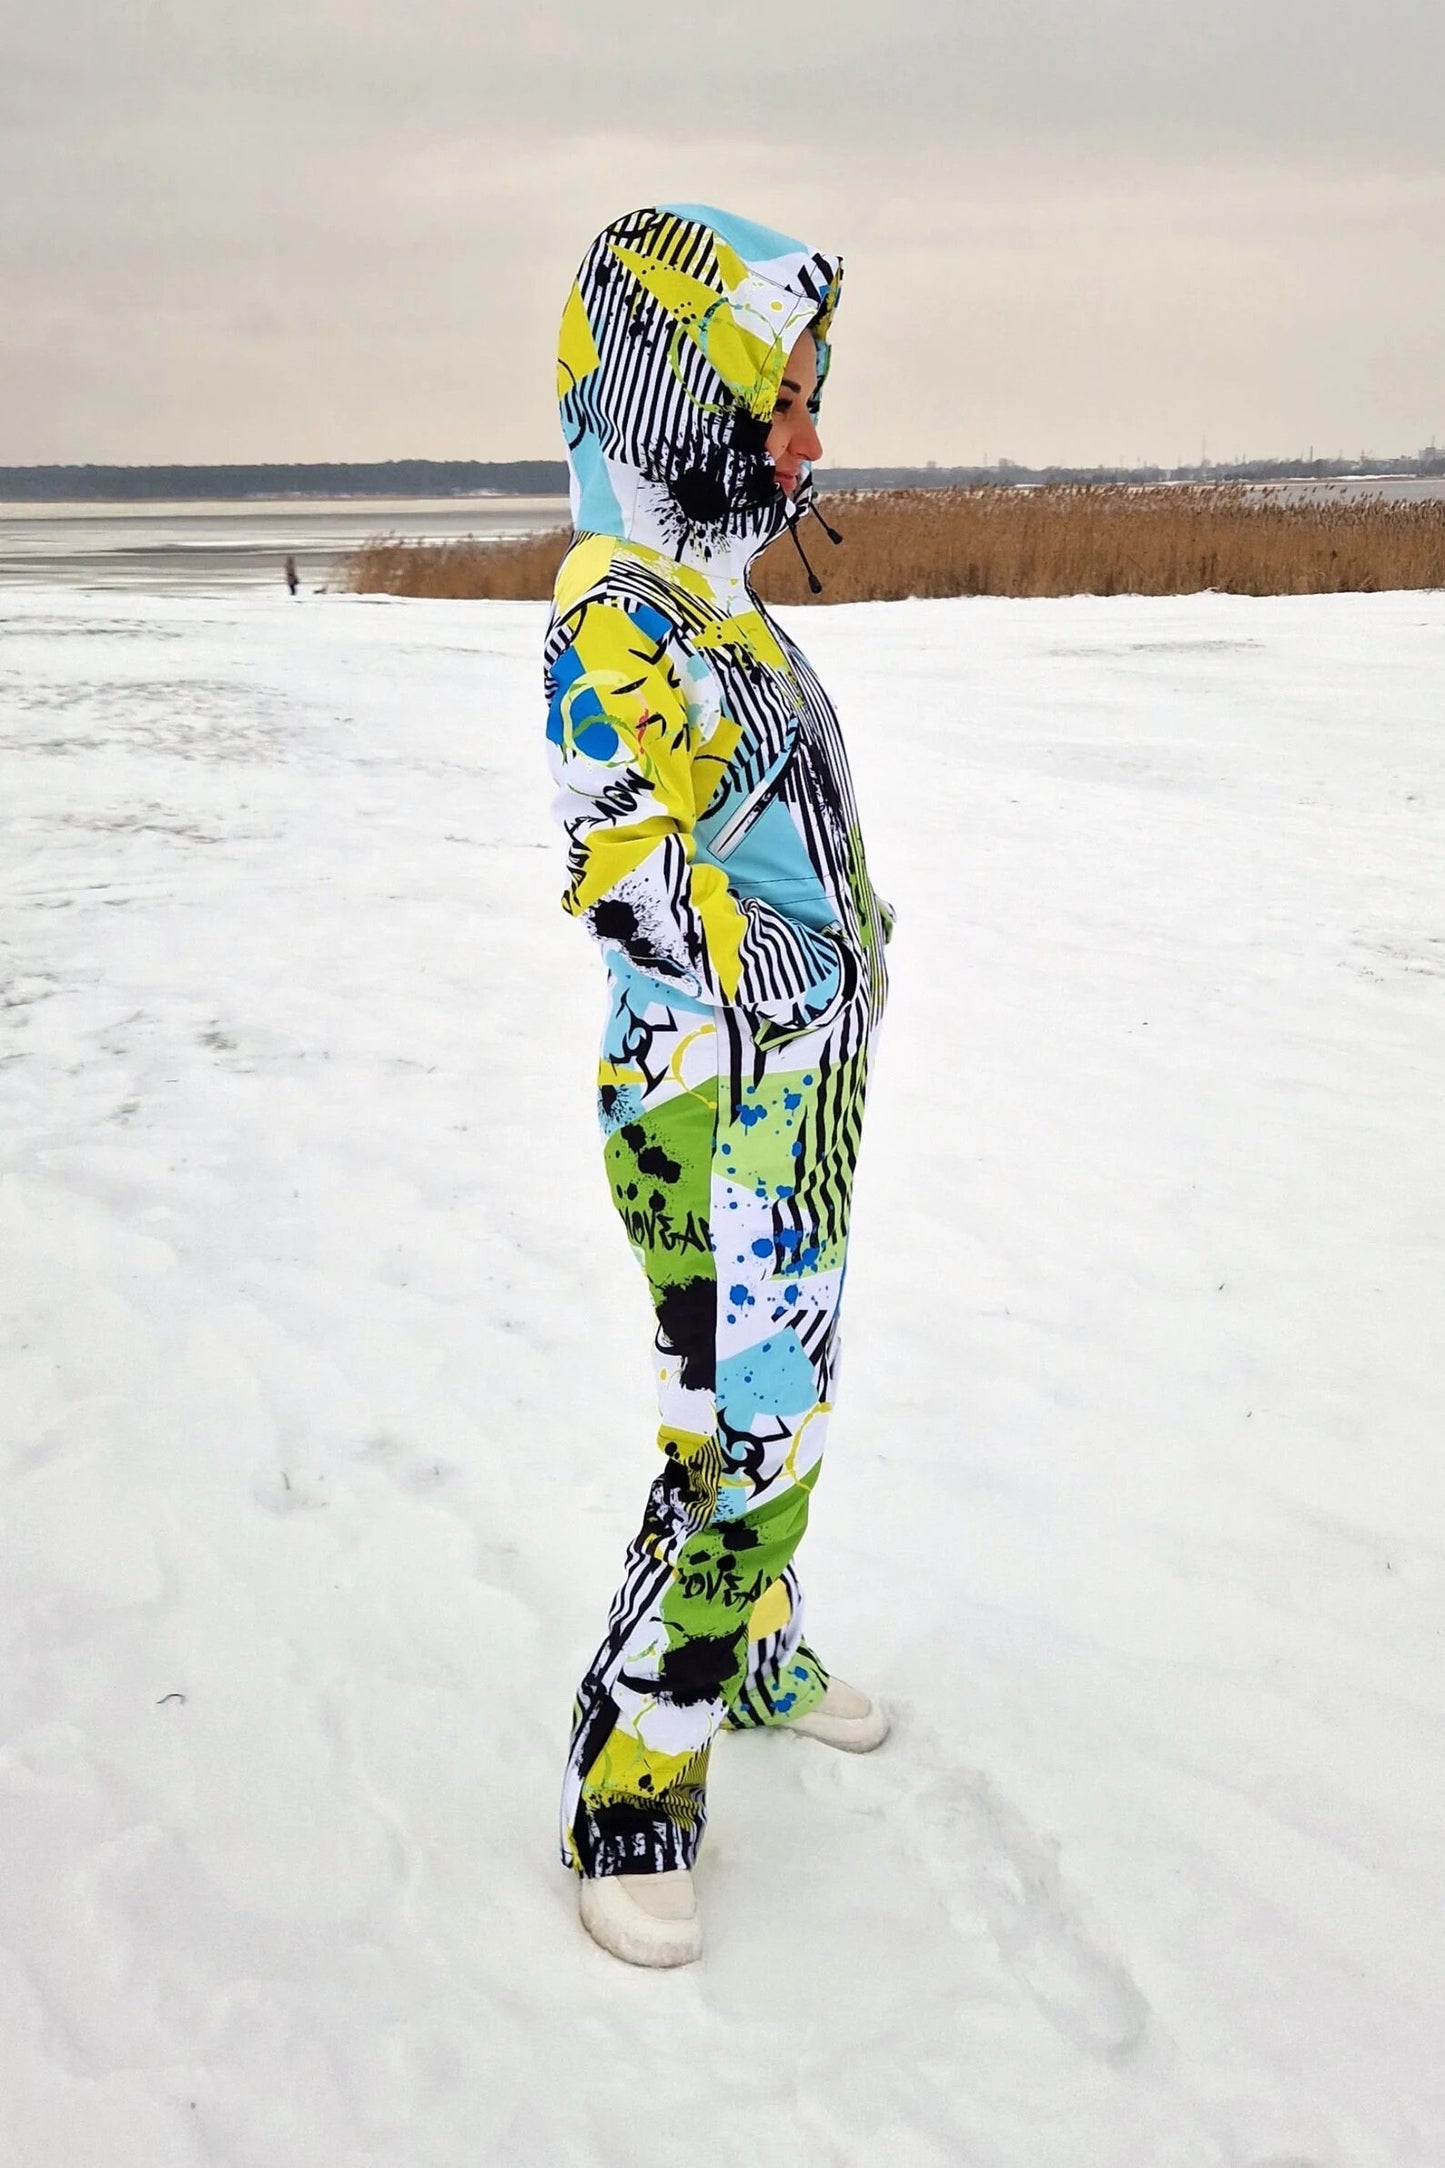 SET: Yellow Green Winter Ski Jumpsuit, Snowboard Clothes, Snowboard suit, Skiing Overall, Women Mountain's clothes, Winter Thermal underwear